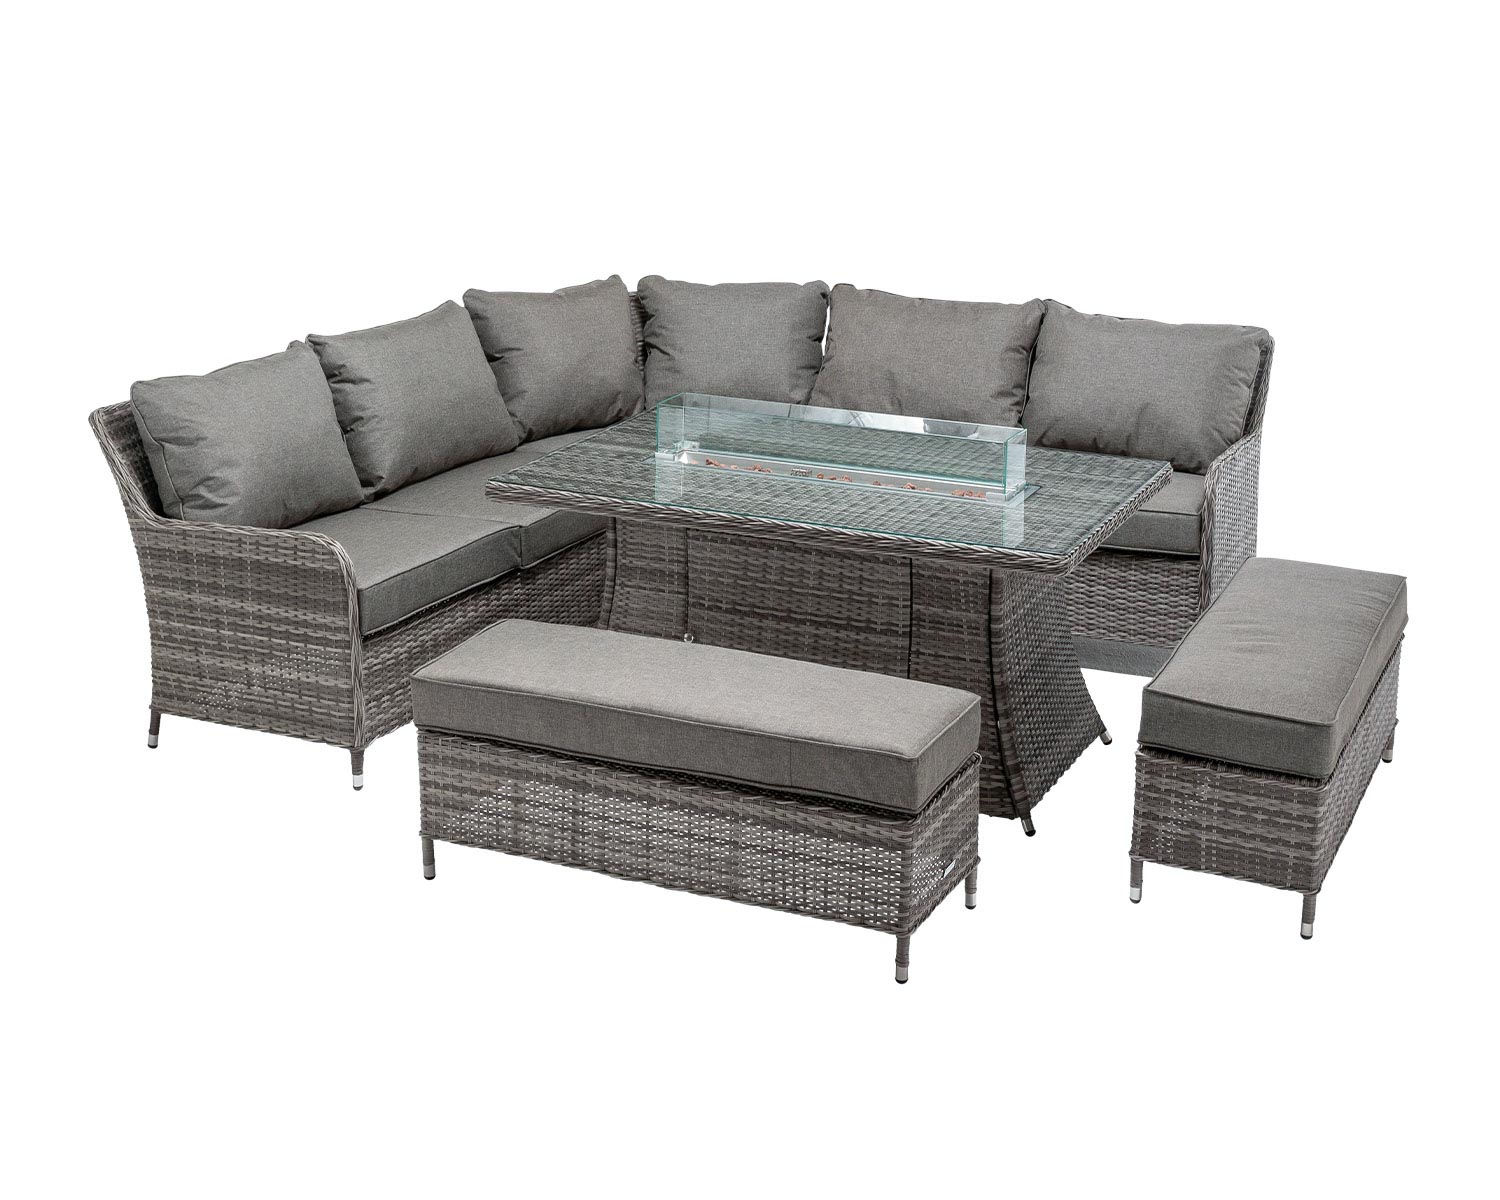 Monte Carlo Rattan Garden Corner Dining Set With Rectangular Fire Pit Dining Table In Grey